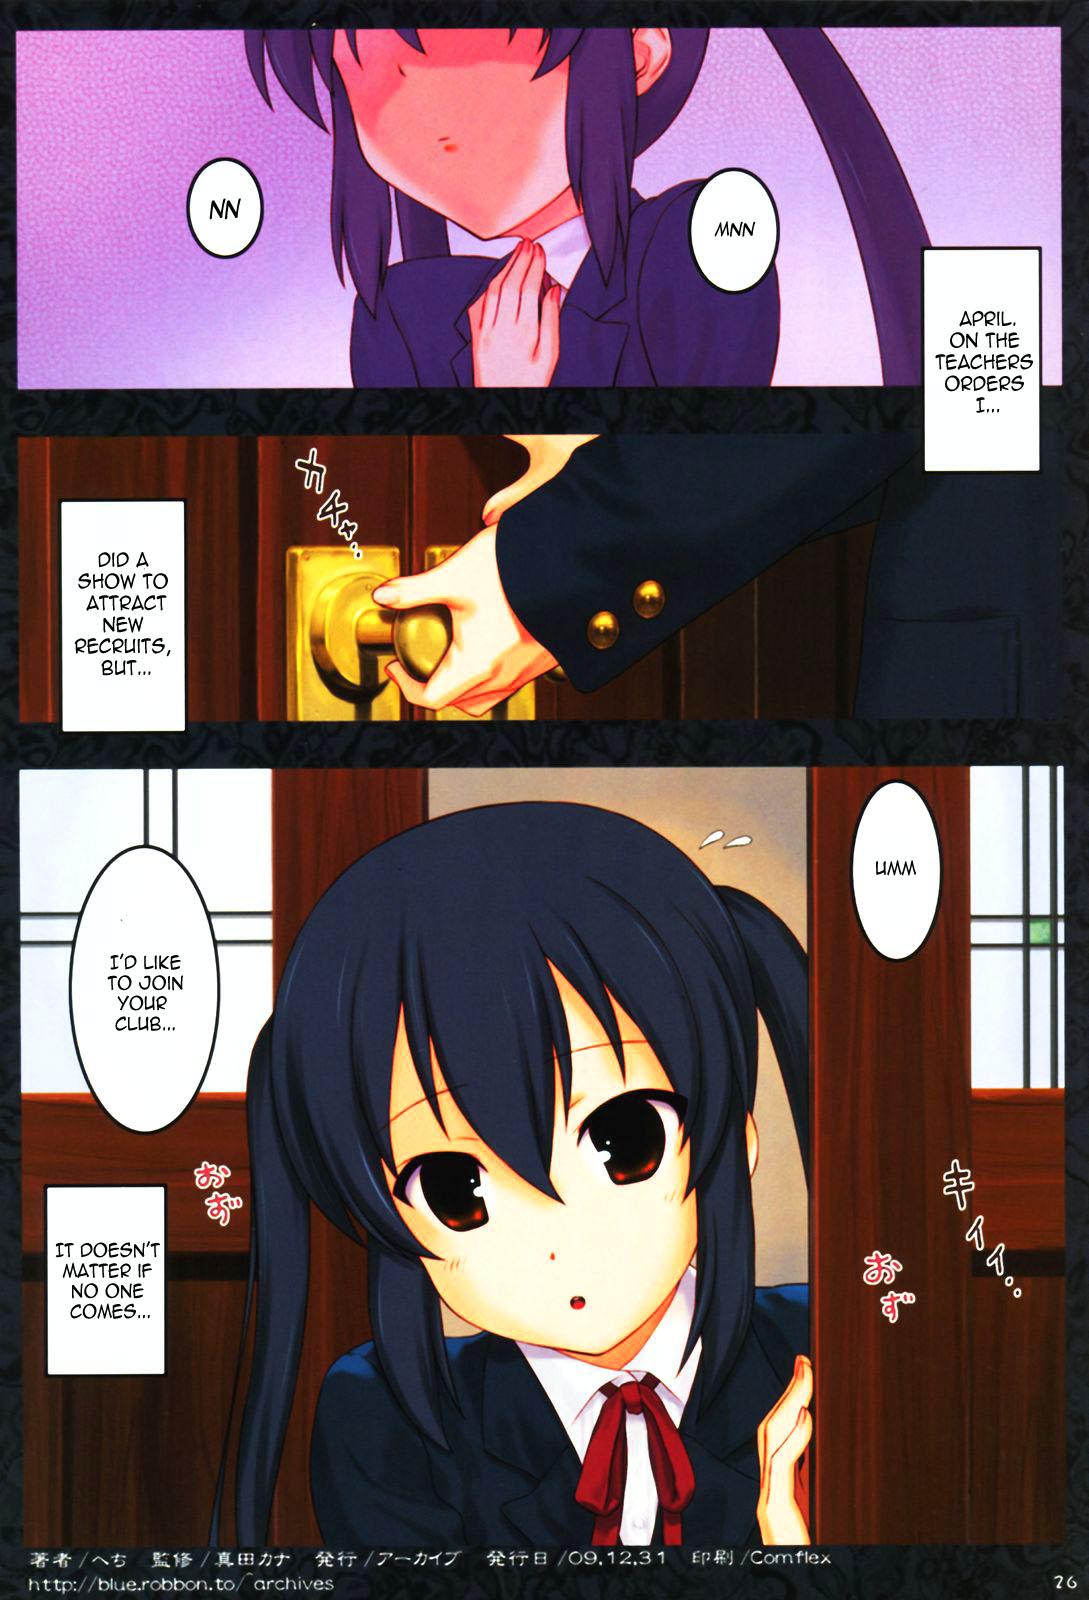 Glory Hole (C77) [Archives (Hechi)] Ura K-ON!! 2 | The Other K-ON!! 2 (K-ON!) [English] =LWB= - K-on Sex Toy - Page 26